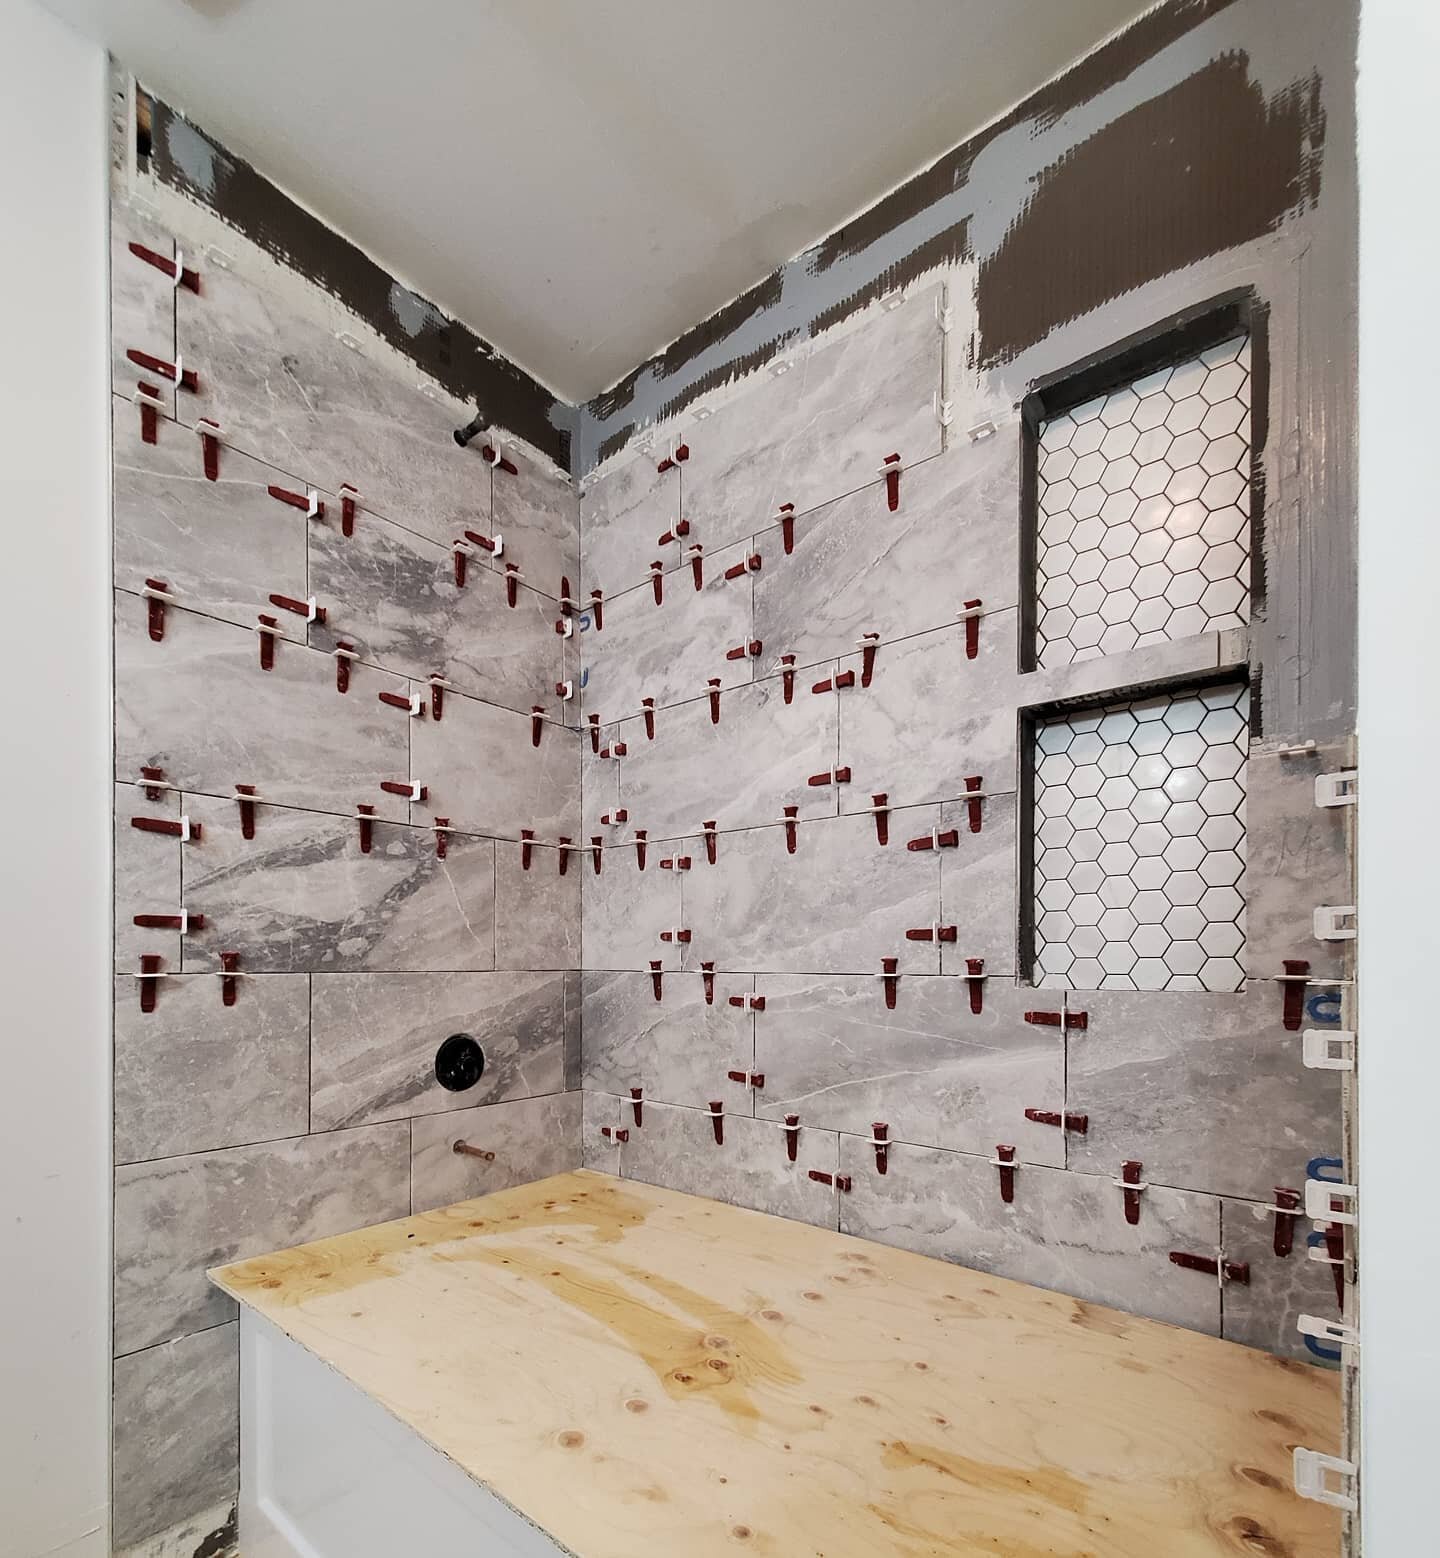 We don't install tile ourselves all that often, but we have a little time before our next job and decided to tile the bathroom on our current project. Definitely not a professional tile setter but this bathroom is coming along nicely.
.
.
.
.
#contra